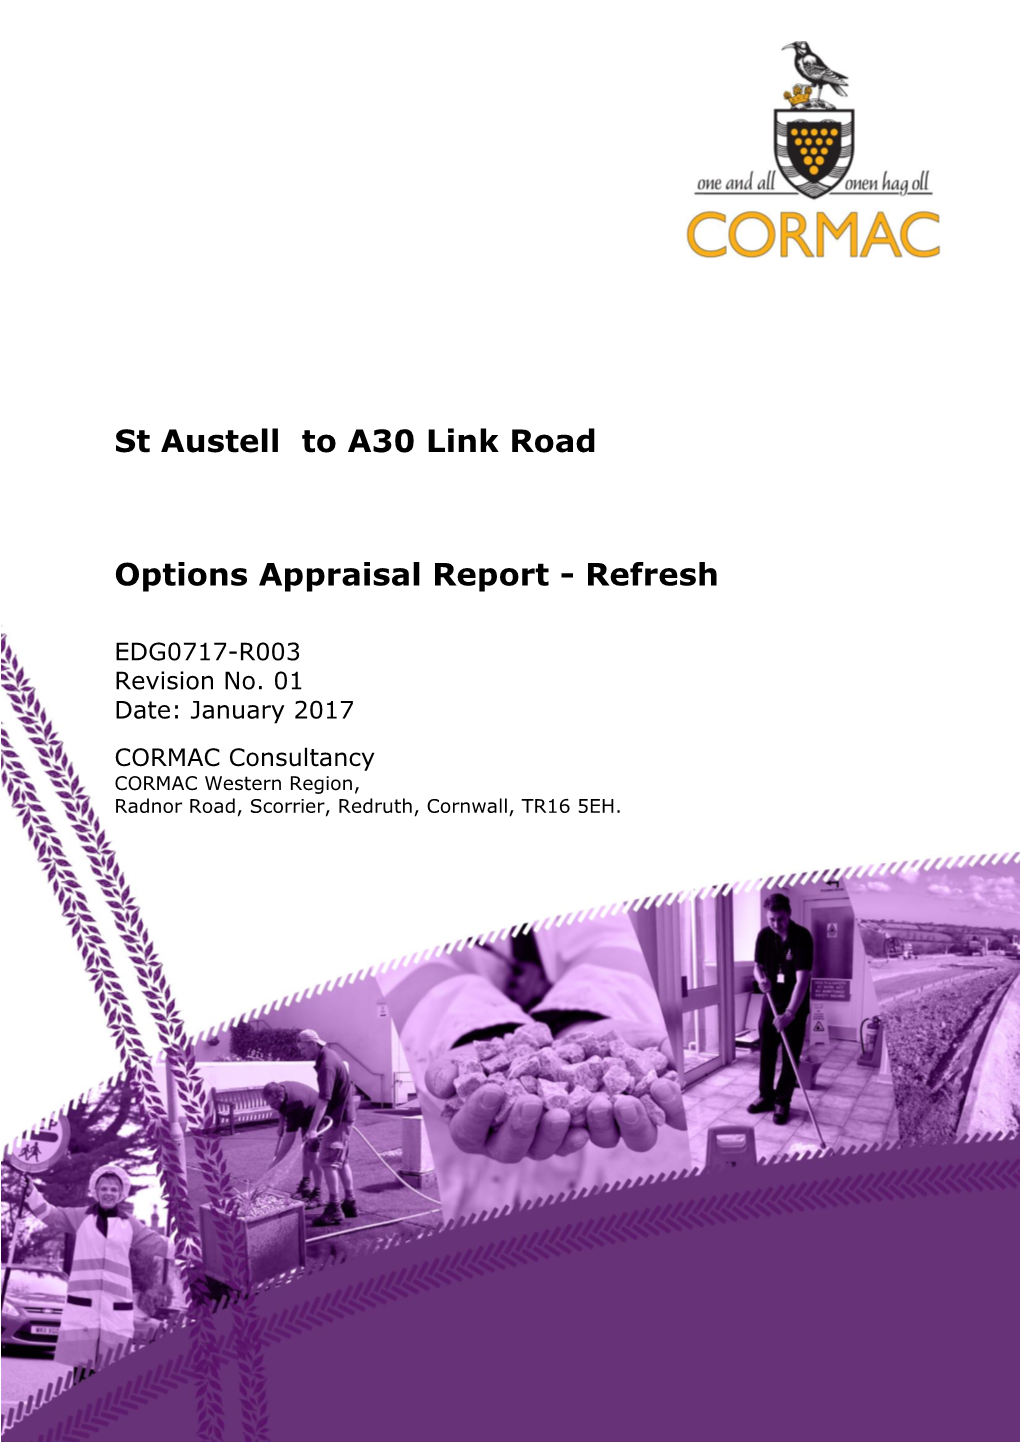 St Austell to A30 Link Road Options Appraisal Report